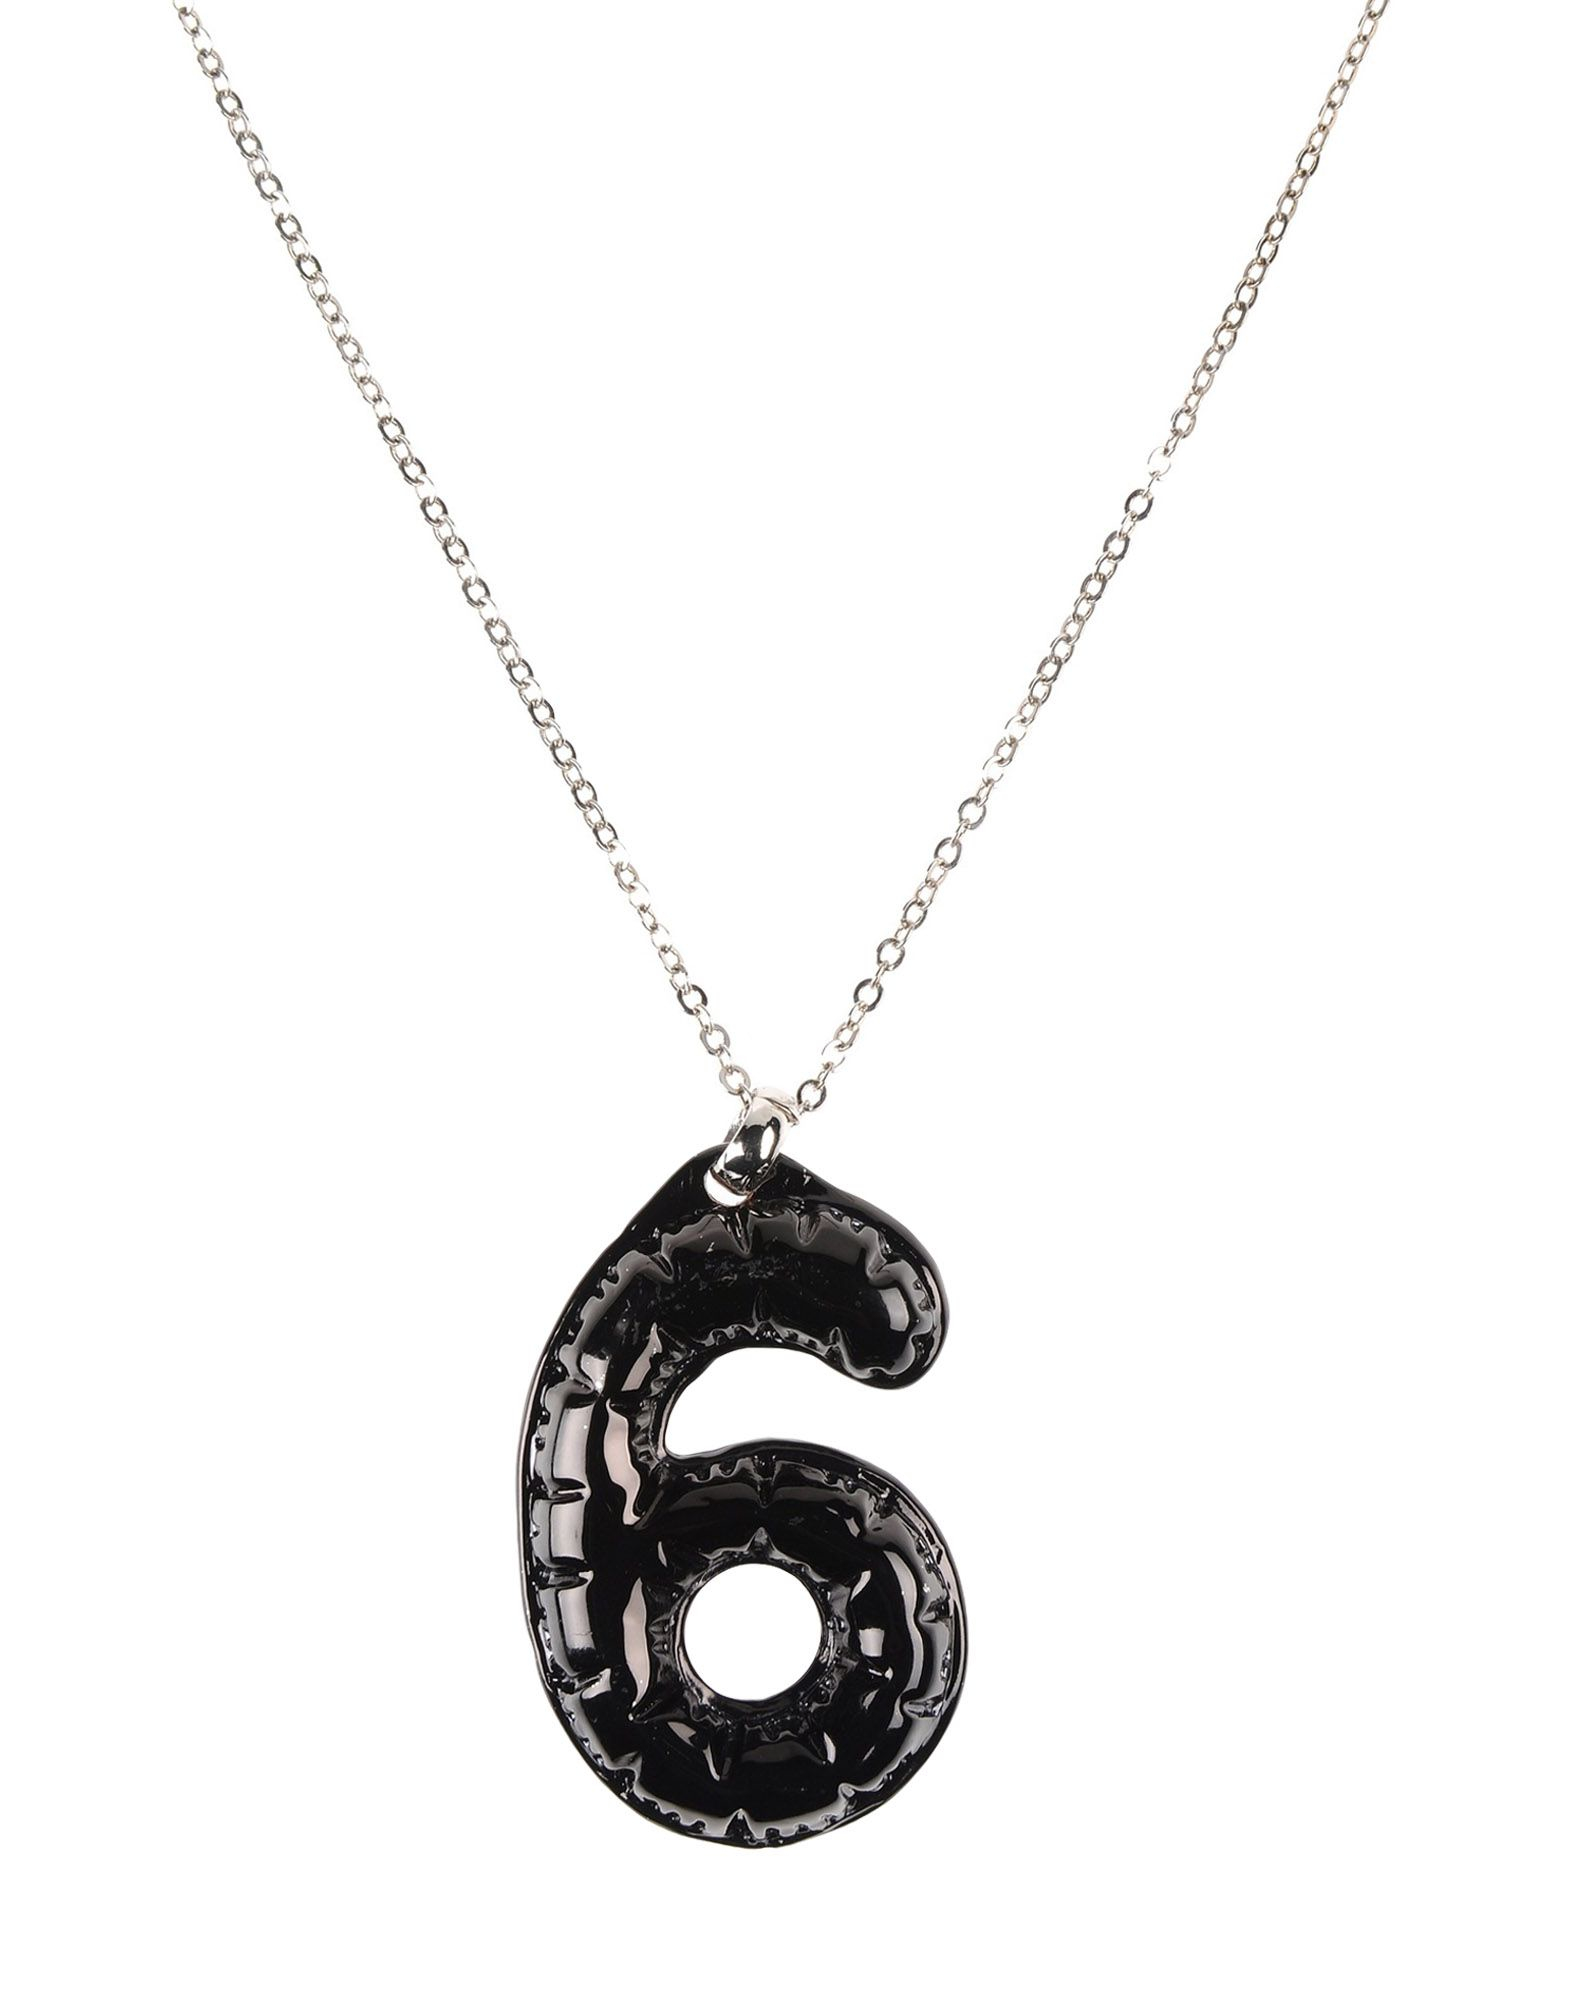 Mm6 by maison martin margiela Necklace in Silver (Black) | Lyst